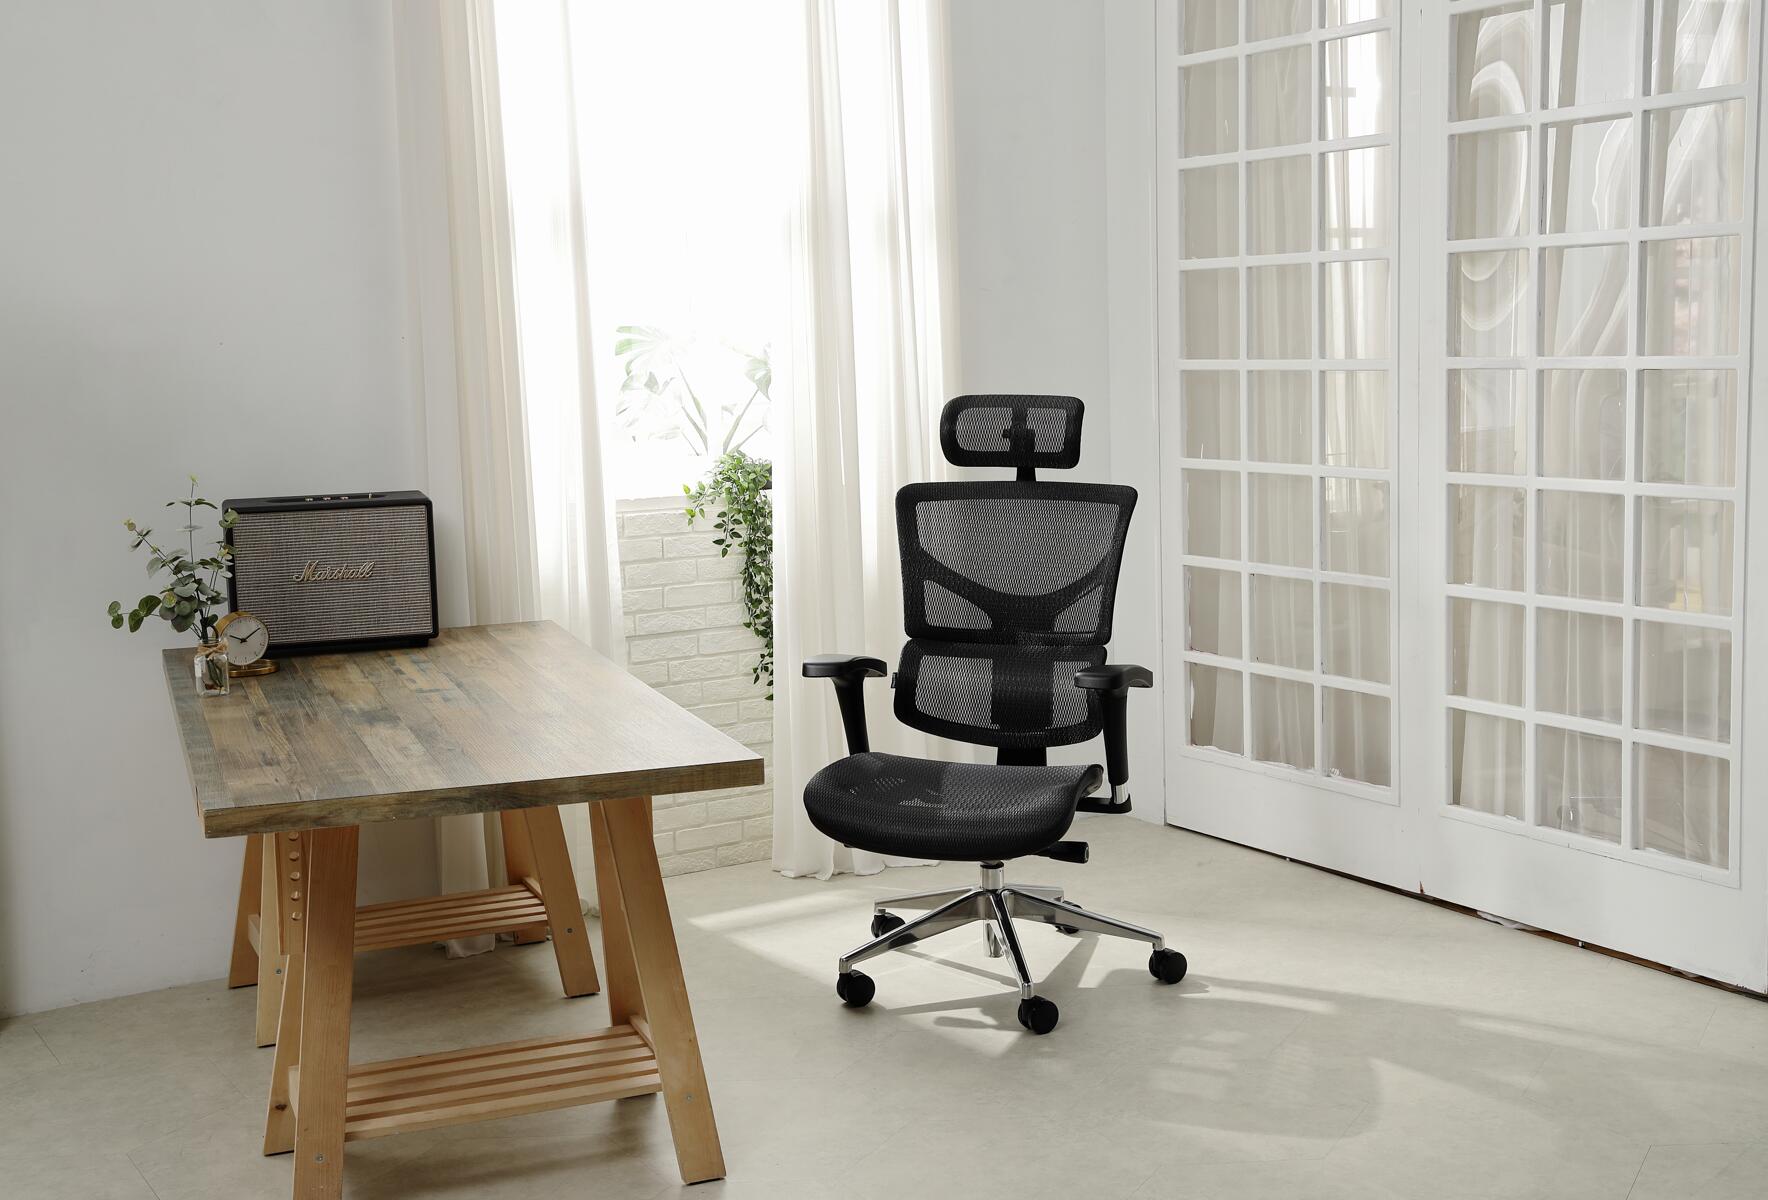 What is ergonomic office furniture?